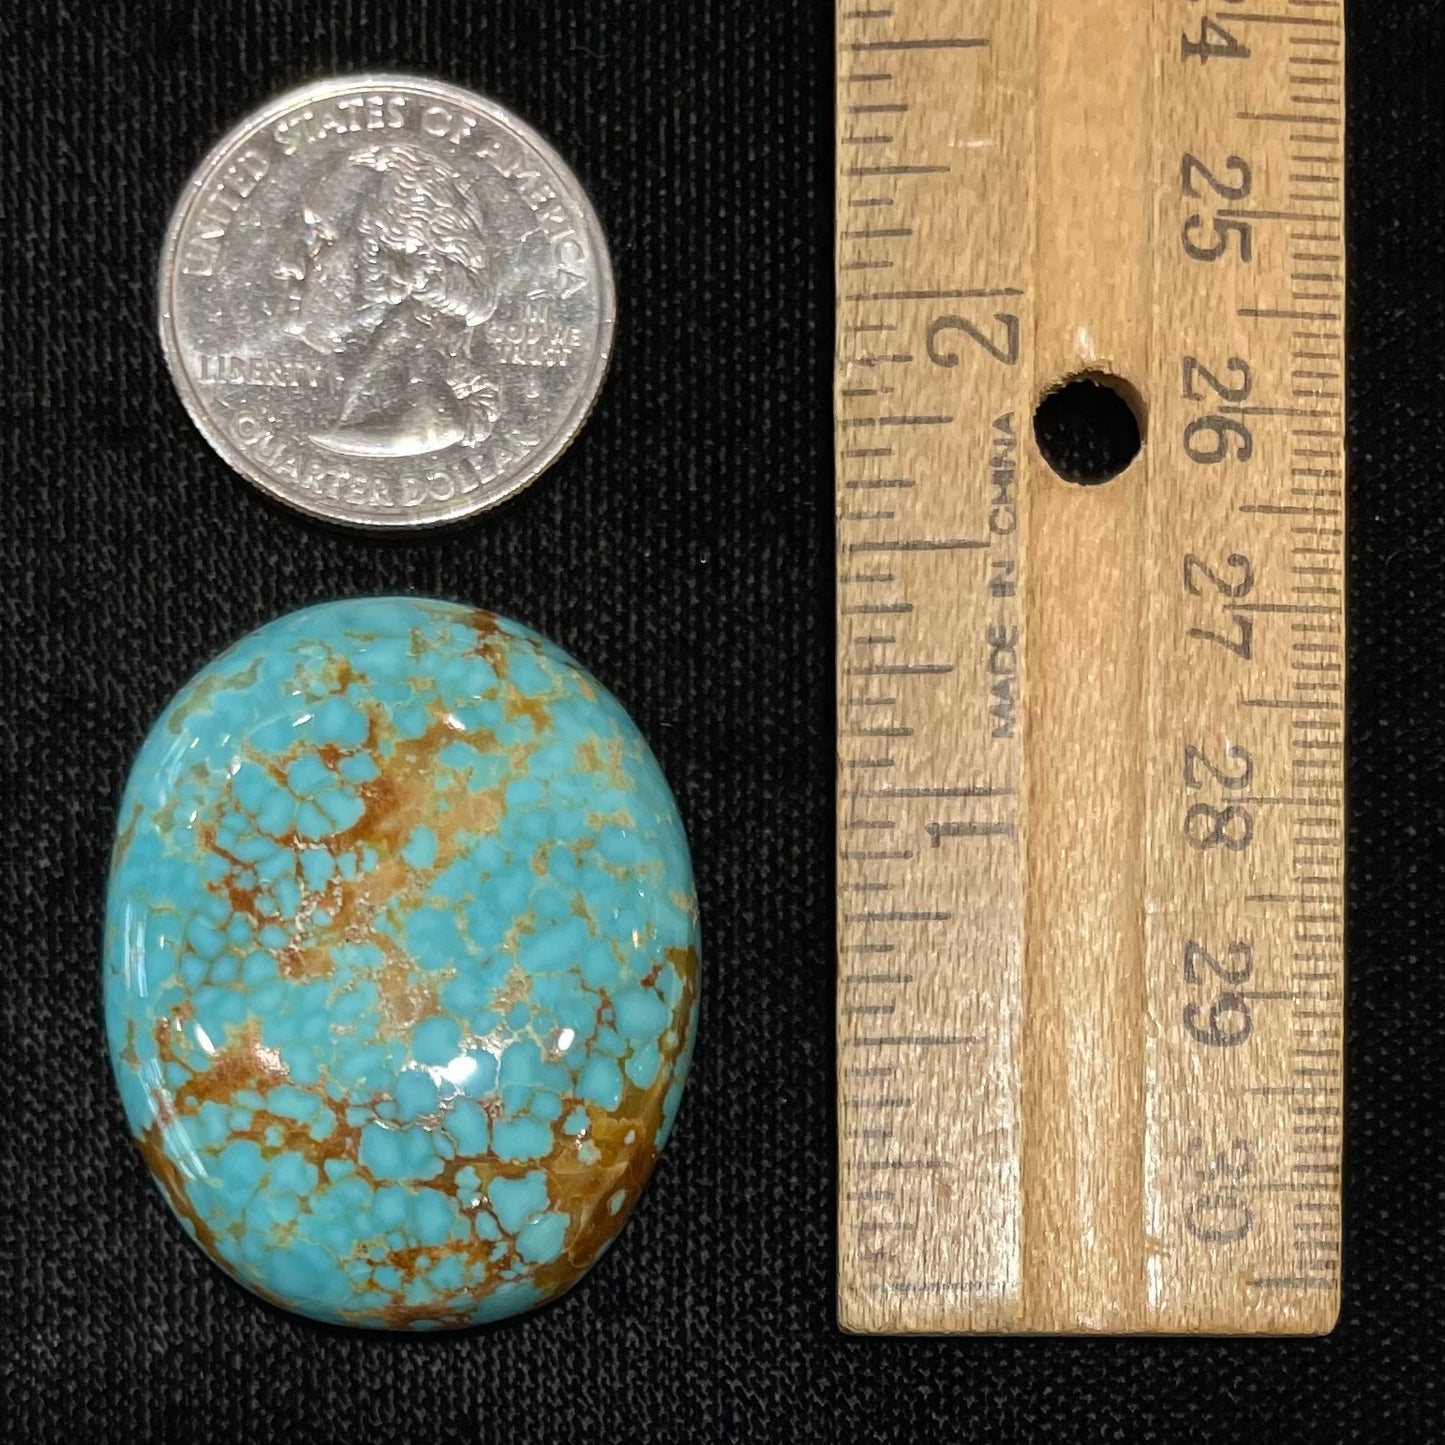 A loose, oval cut turquoise cabochon from Number 8 Mine, Nevada.  The stone is blue with a golden brown webbed matrix.